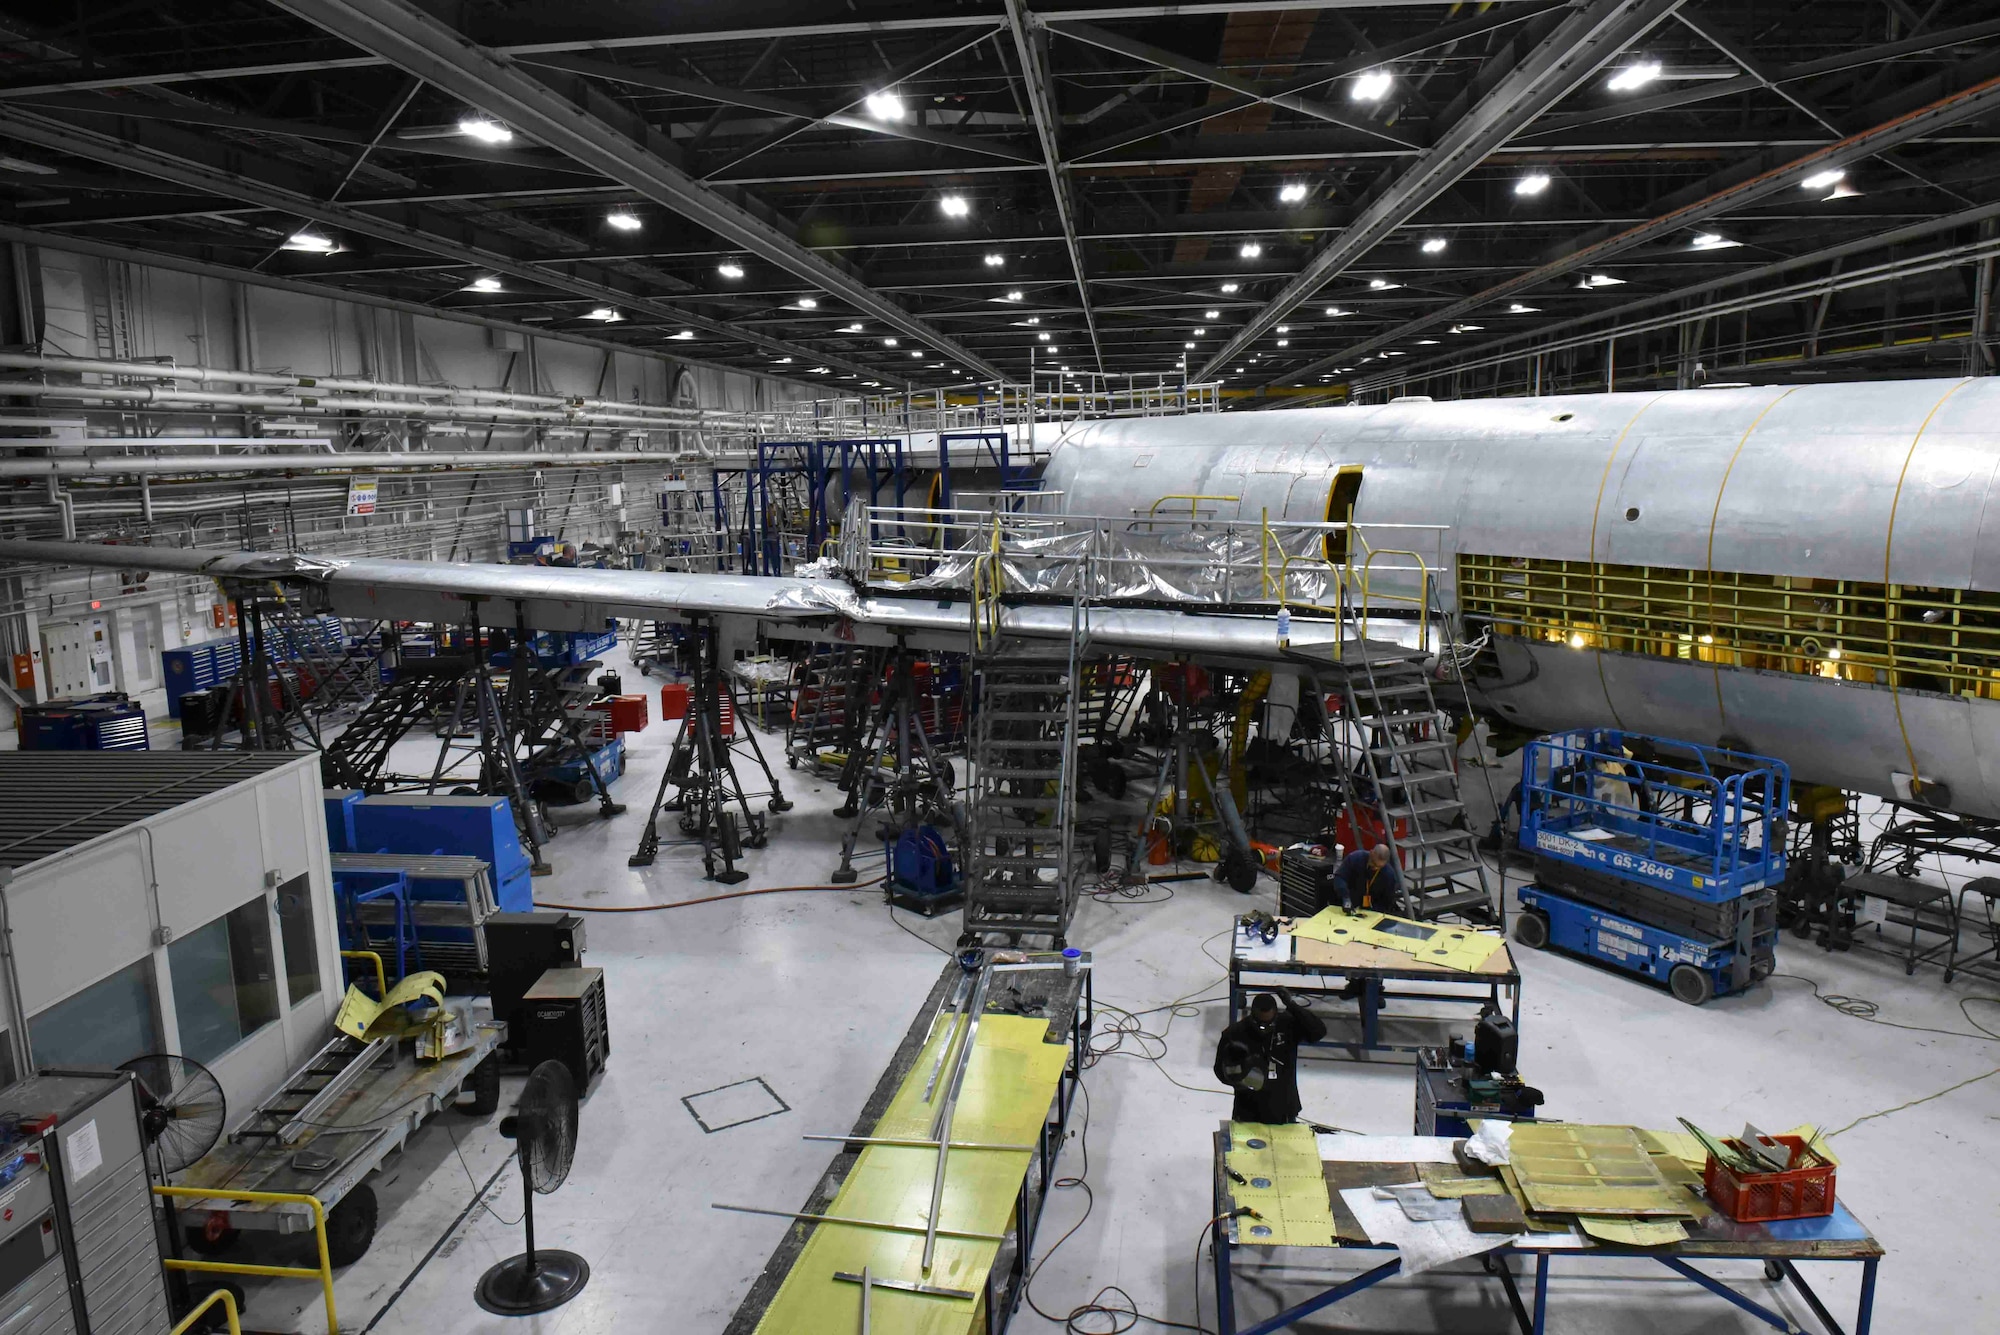 A KC-135 Stratotanker undergoes programmed depot maintenance at the Oklahoma City Air Logistics Complex at Tinker Air Force Base, Oklahoma, Nov. 23, 2019. During PDM, each KC-135 undergoes a series of inspections, upgrades to the aircraft, and a flight test to ensure proper functionality. (U.S. Air Force photo by Airman Kiaundra Miller)